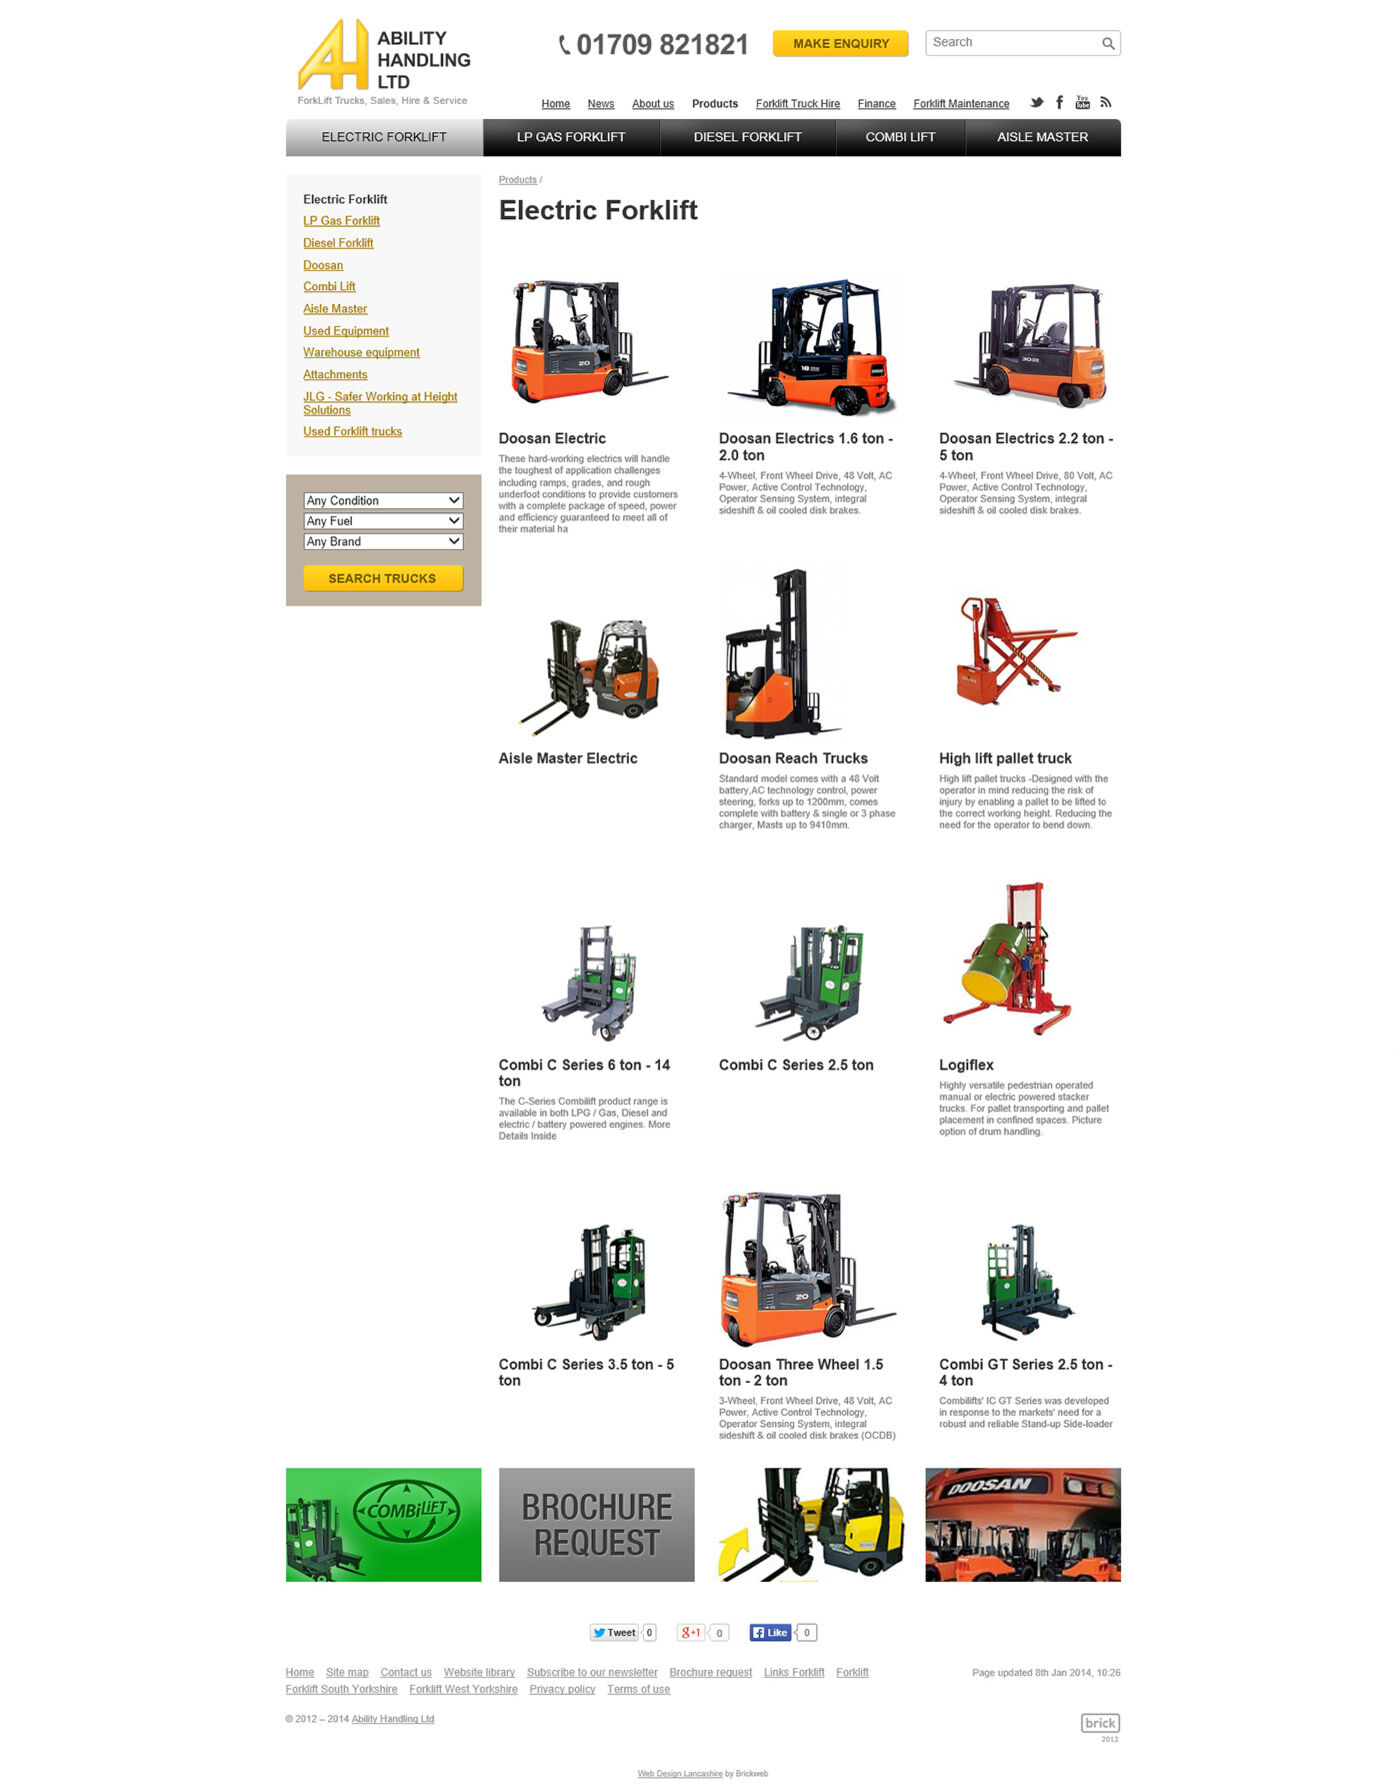 Ability Handling (2013) Products page